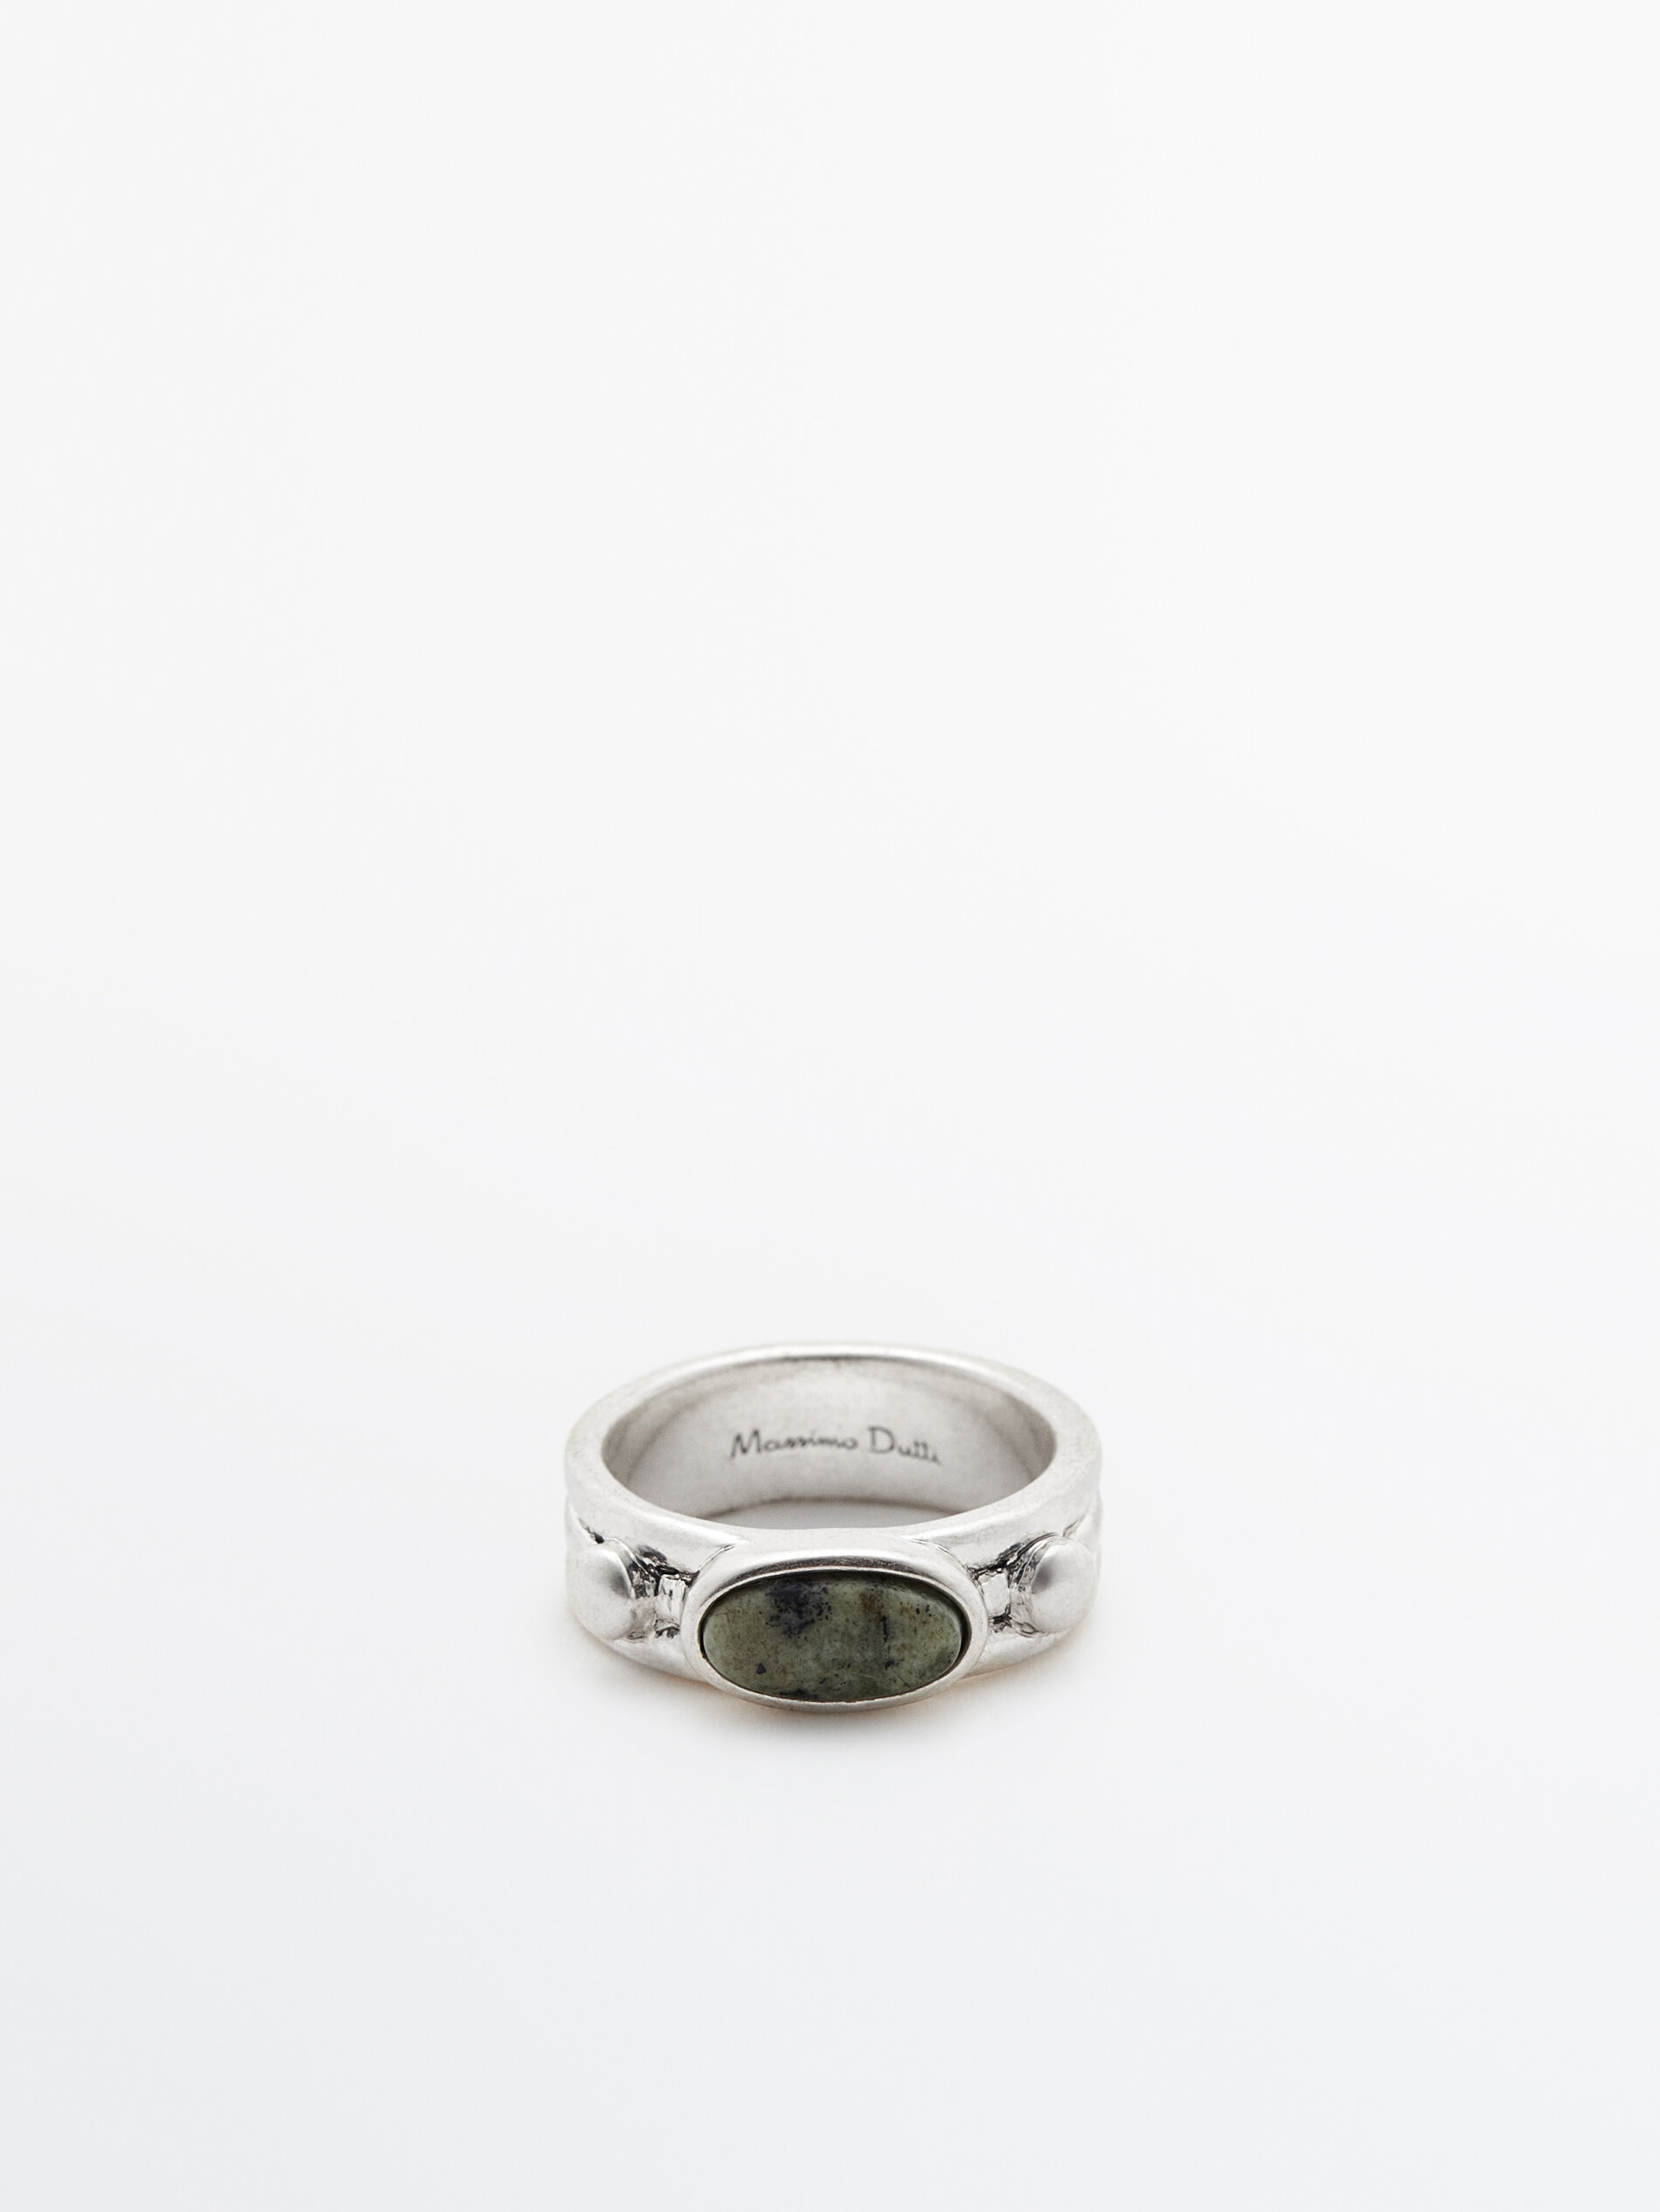 Ring with oval stone